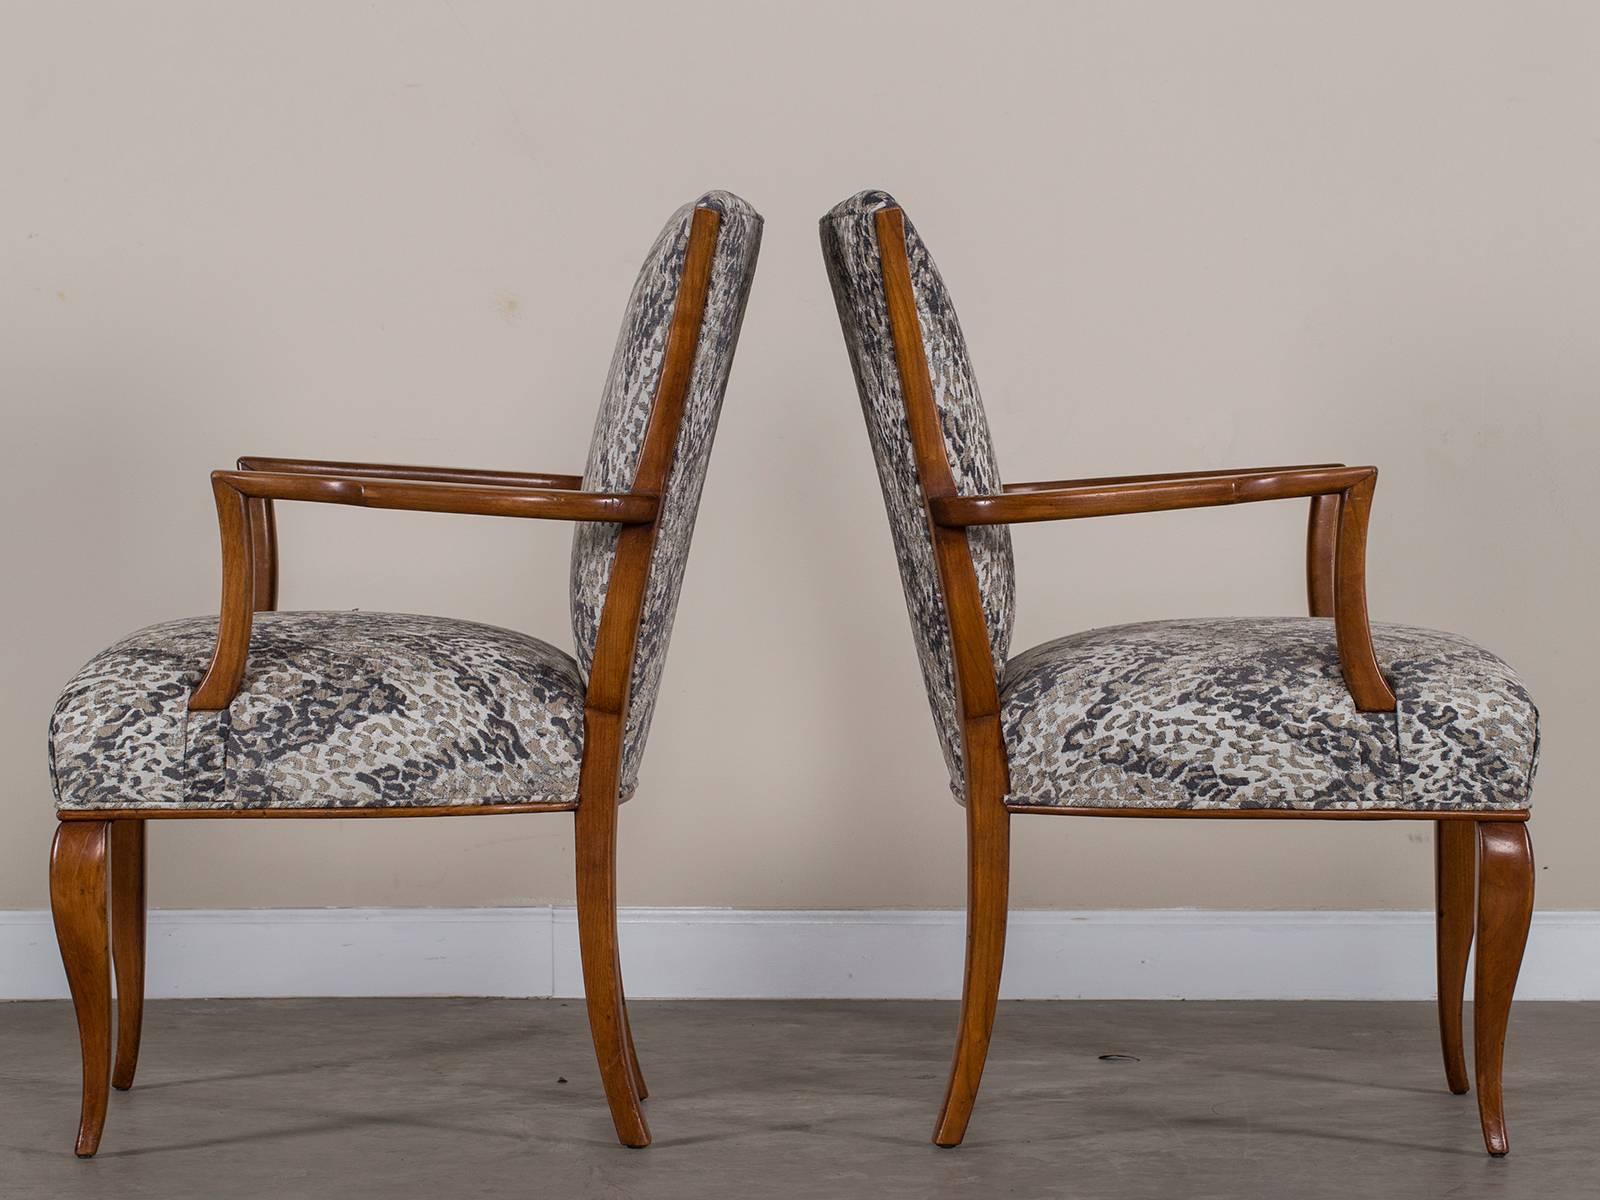 A pair of vintage French Art Deco beechwood armchairs circa 1940 now reupholstered in a contemporary fabric. Please notice the gently curved back that has a flared profile as well as the elegant shape to the legs that give these Art Deco chairs